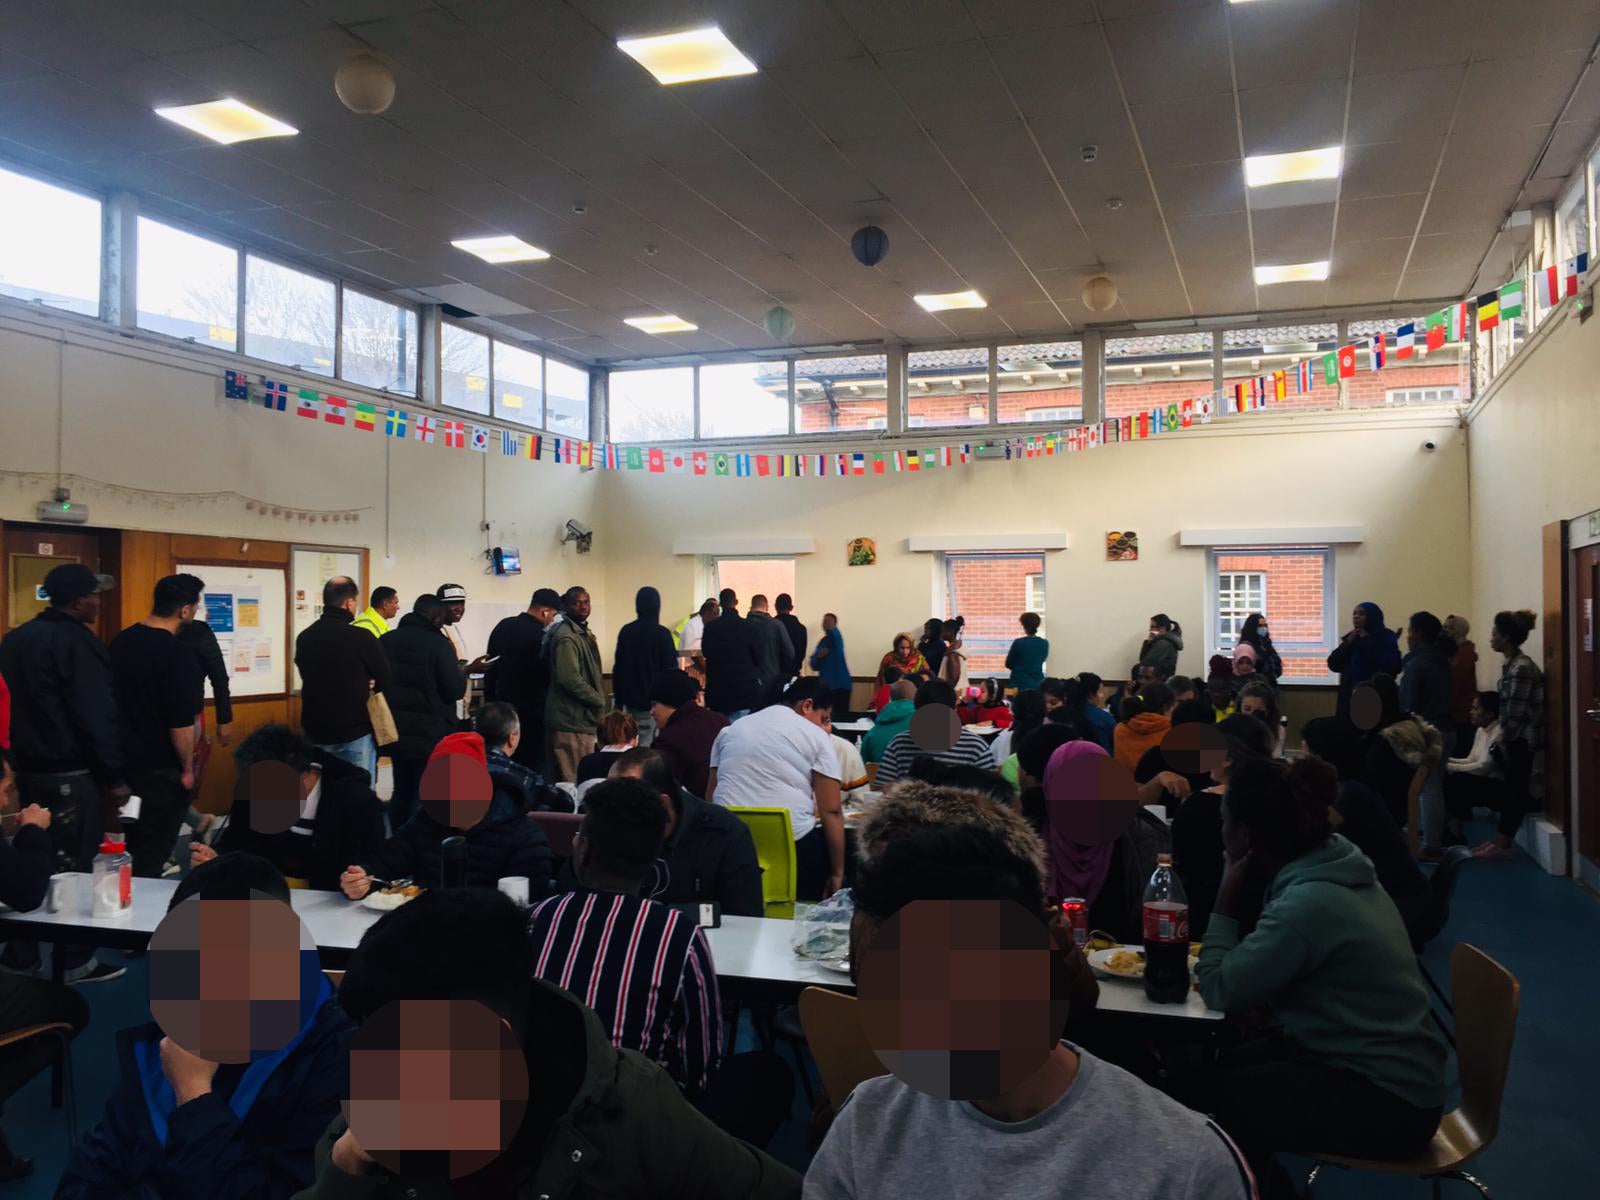 Photos emerged from an asylum accommodation centre in Wakefield, taken on Wednesday after the lockdown was put in place, showing more than 60 people eating and queueing for food in one room, with little distance between them